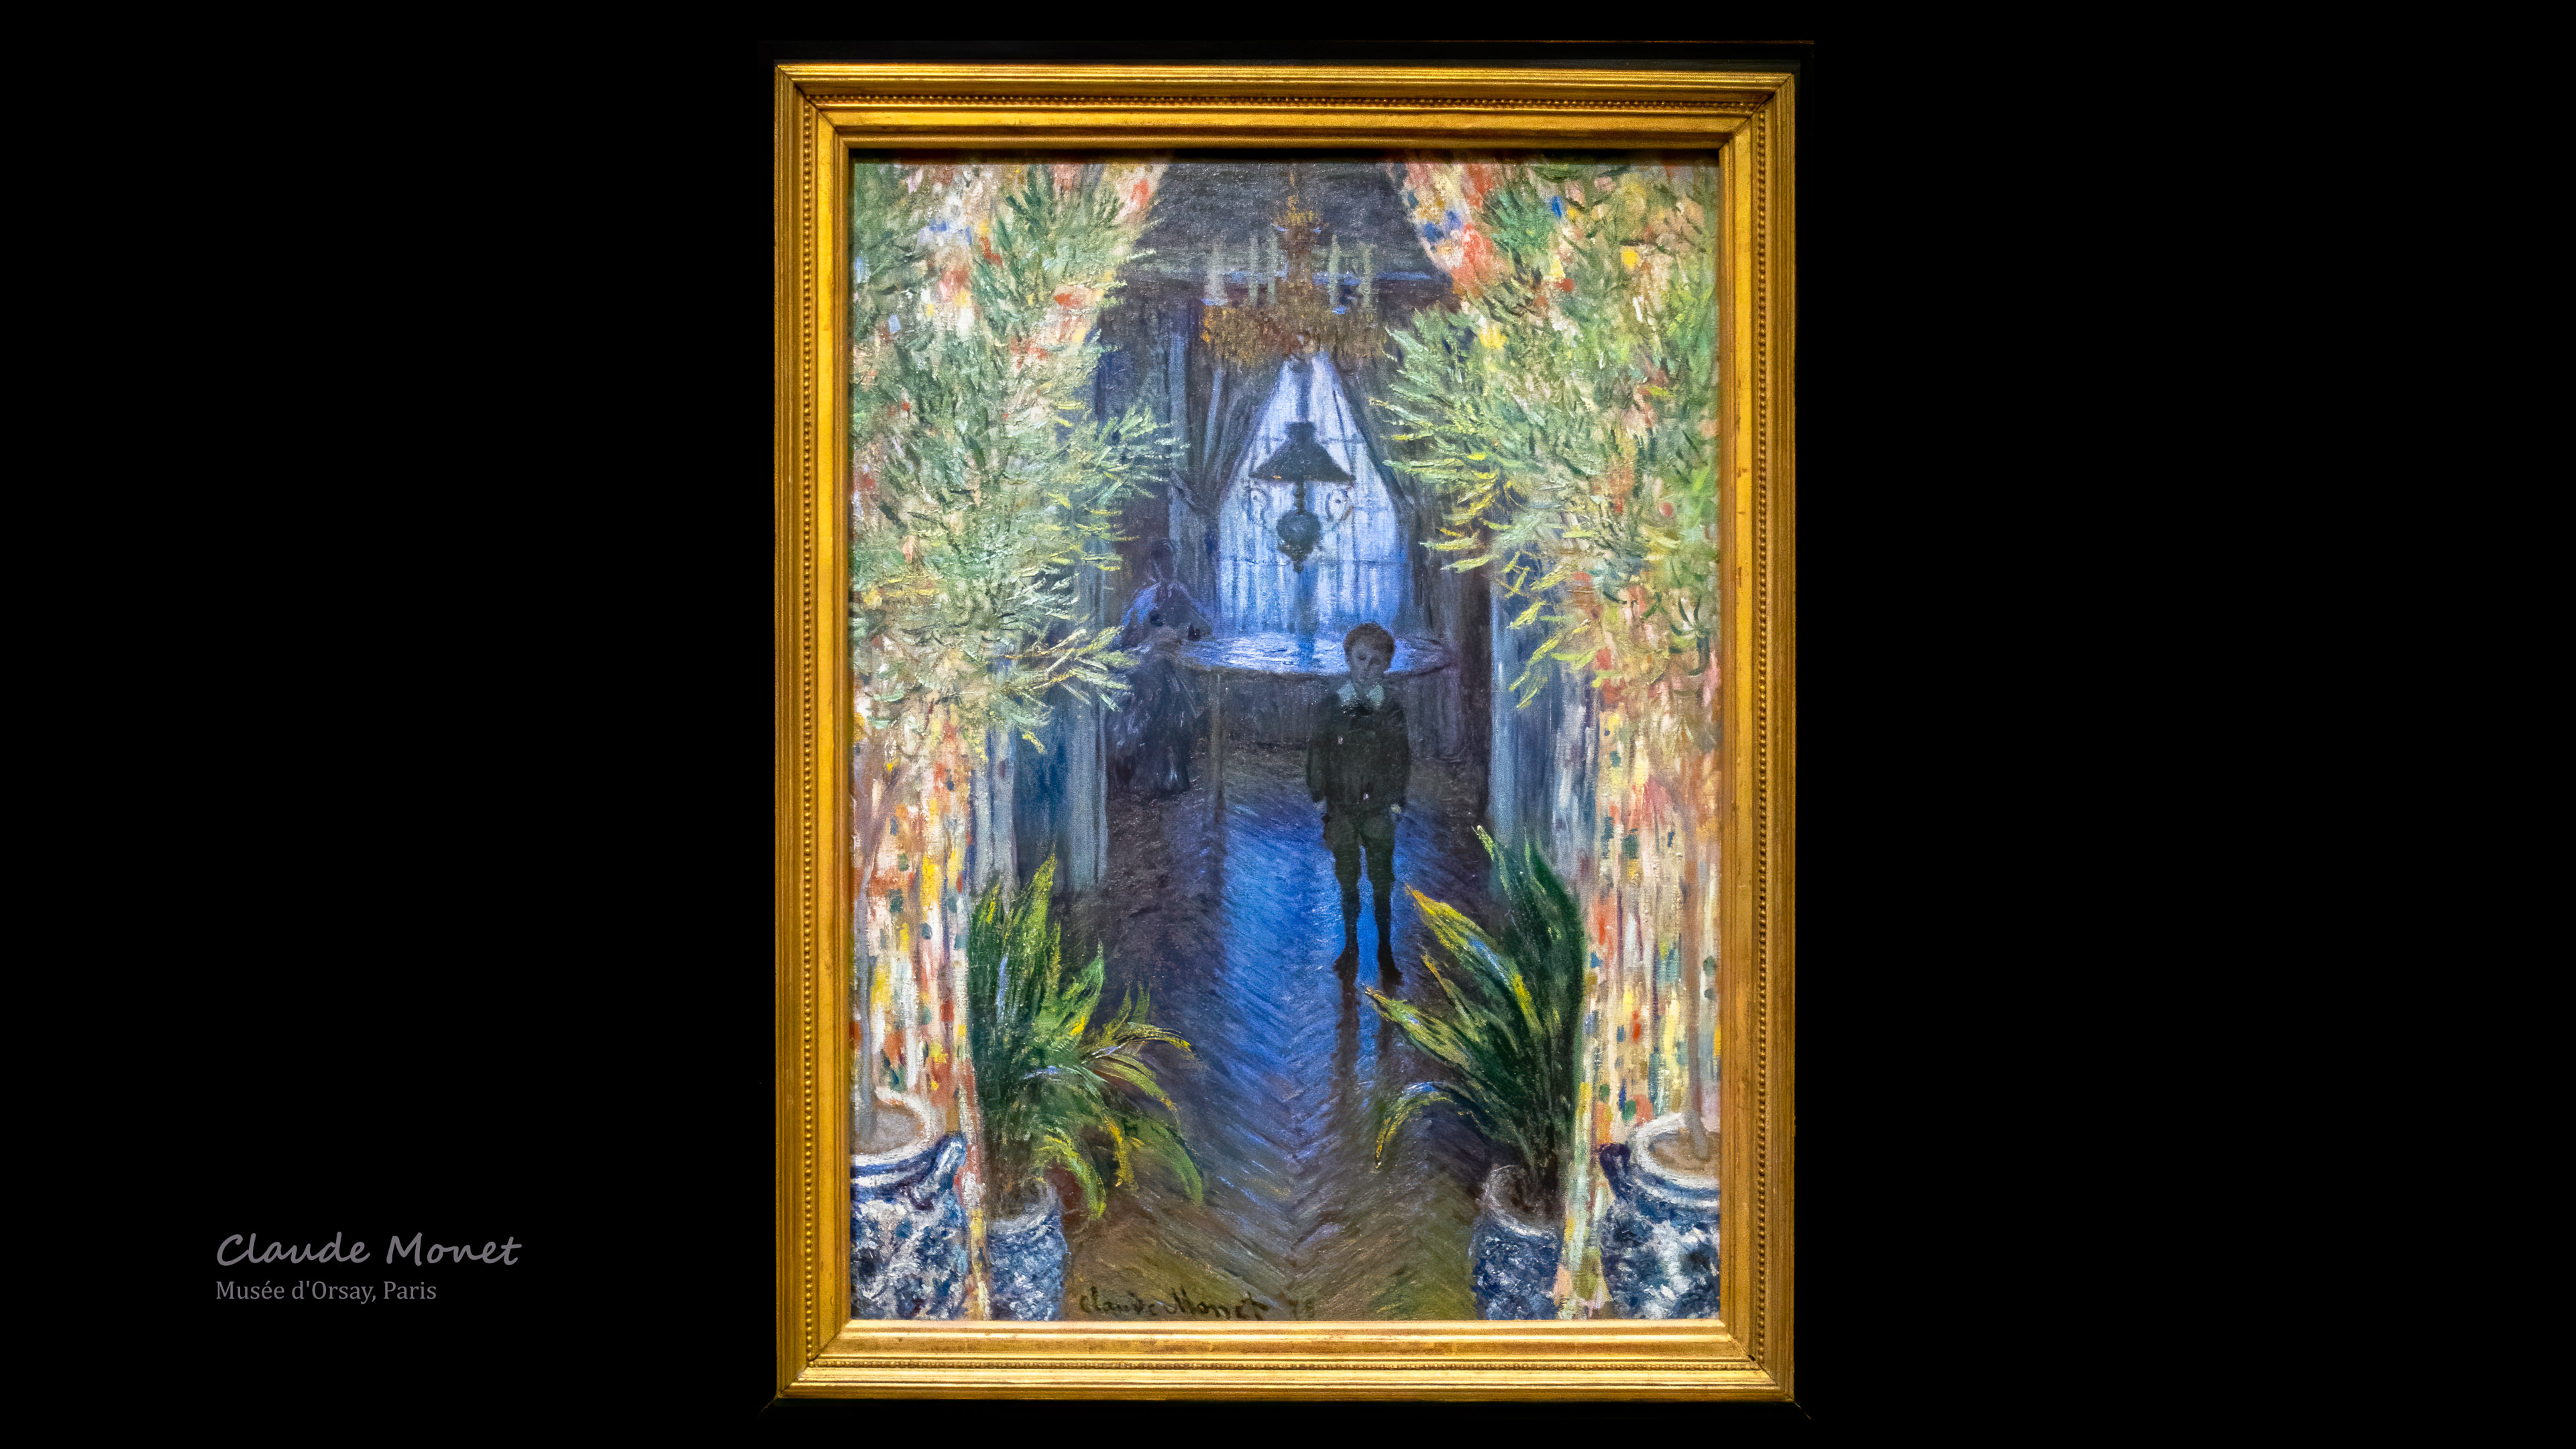 Bring the beauty of Impressionism to your screen with our Monet wallpaper.